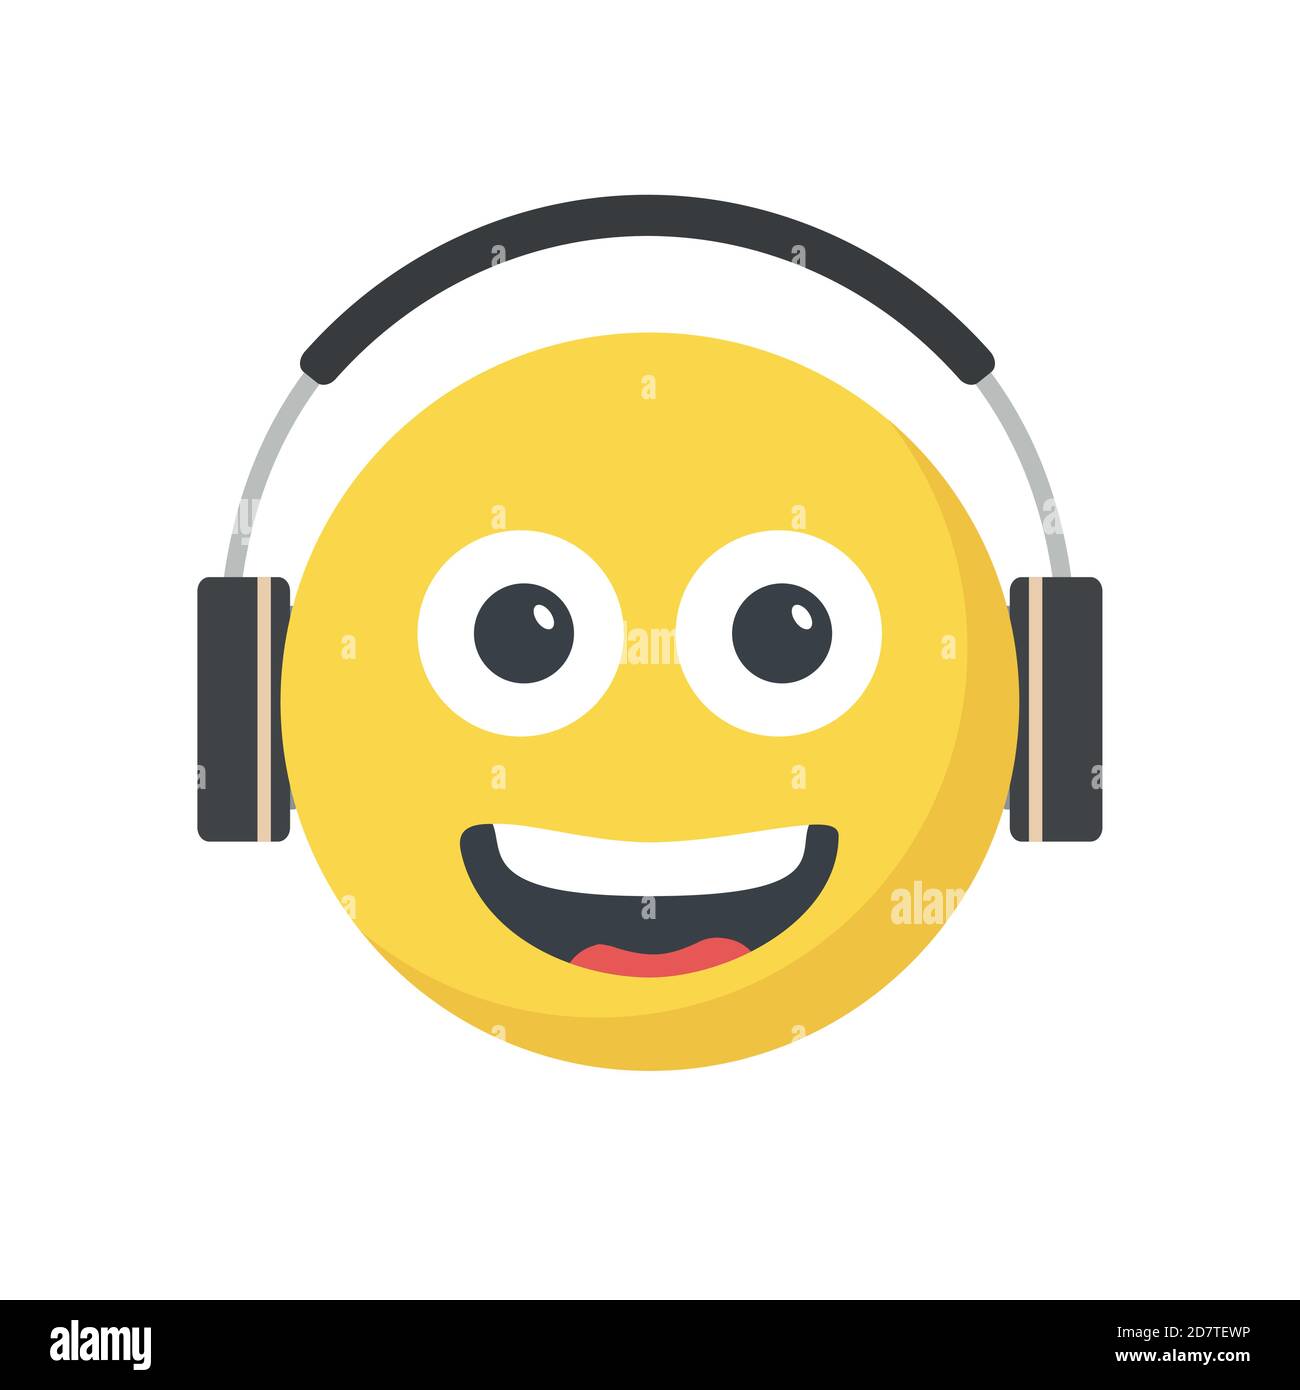 Smiling face emoji with large Ear Headphones, Stock Vector